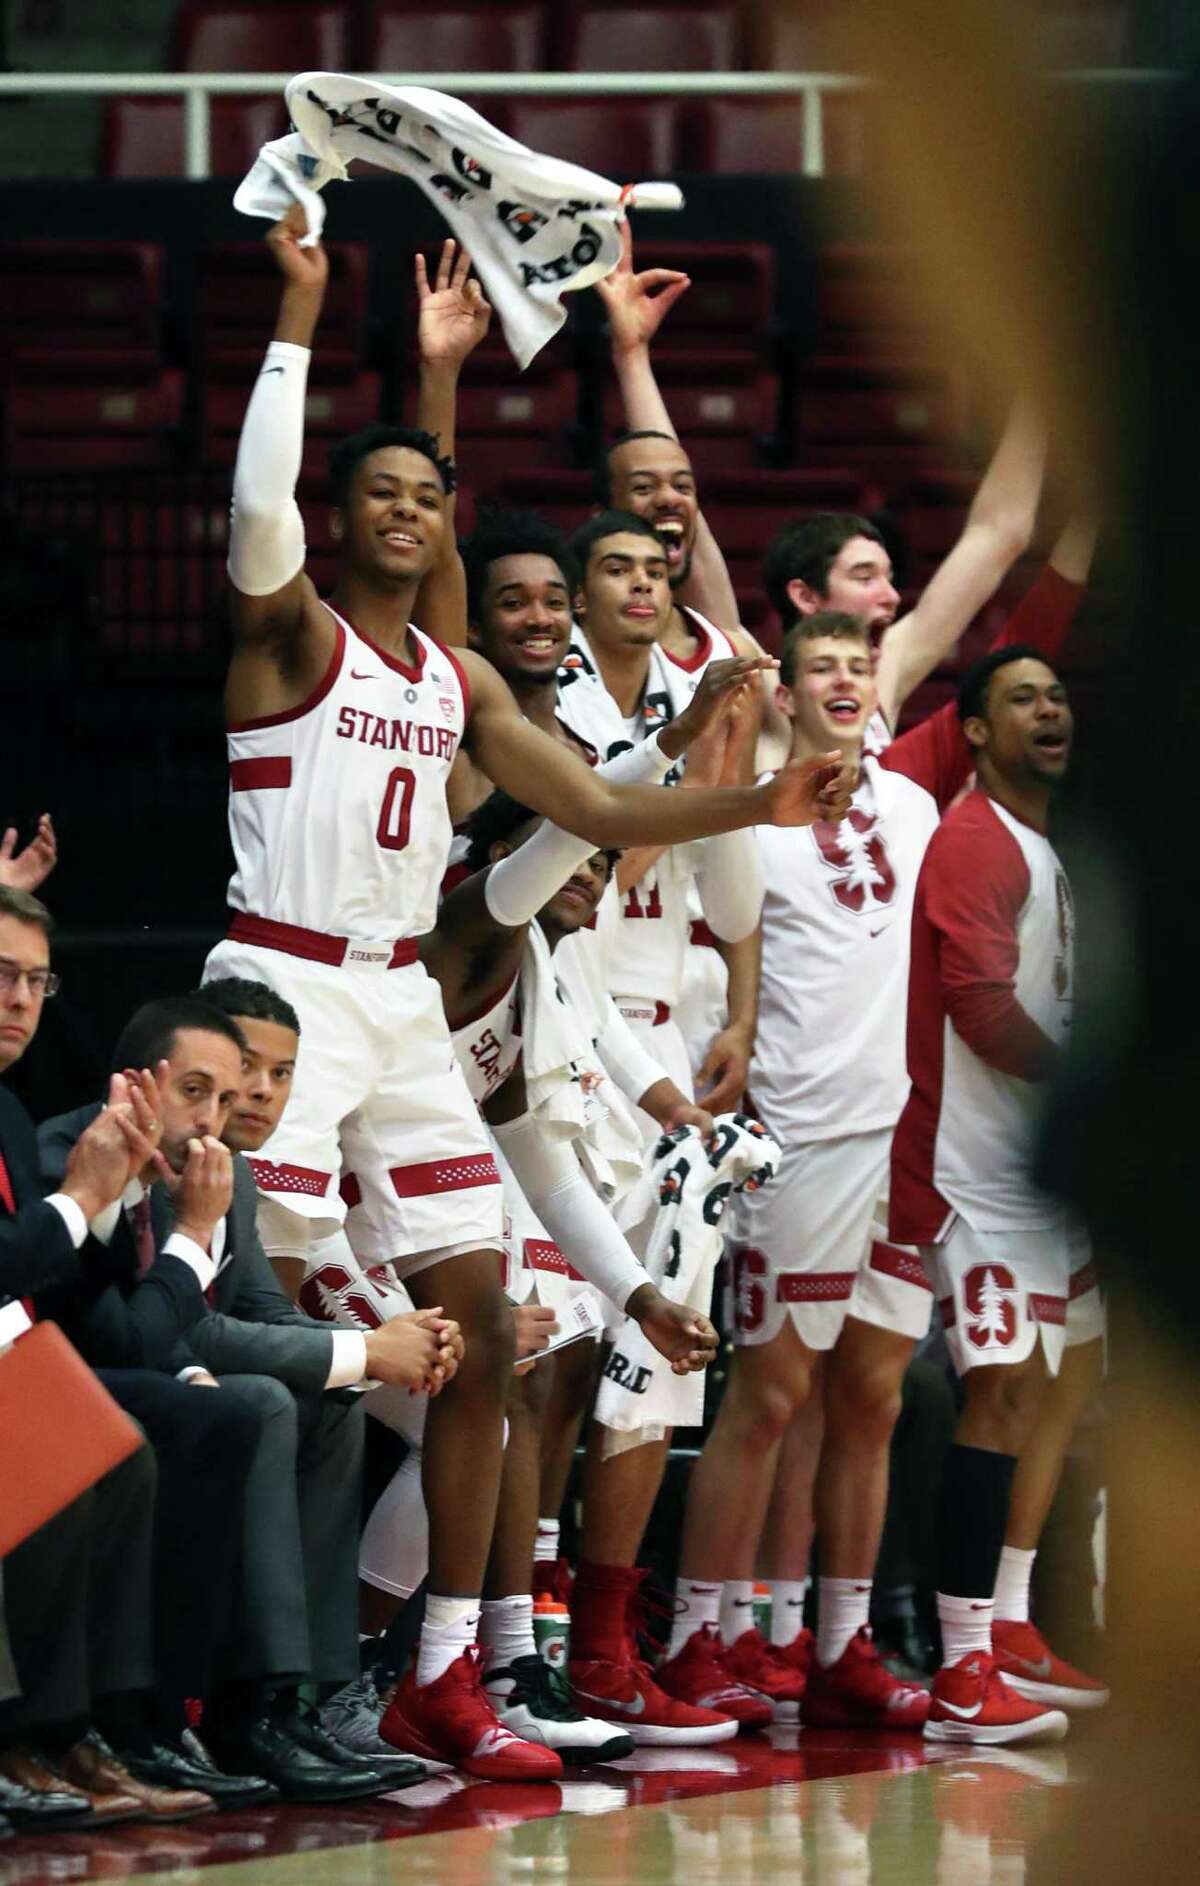 Stanford's KZ Okpala (0) and the Cardinal bench cheer a 3-pointer against Portland State in 1st half during NCAA men's basketball game at Maples Pavilion in Stanford on Wednesday, November 28, 2018.